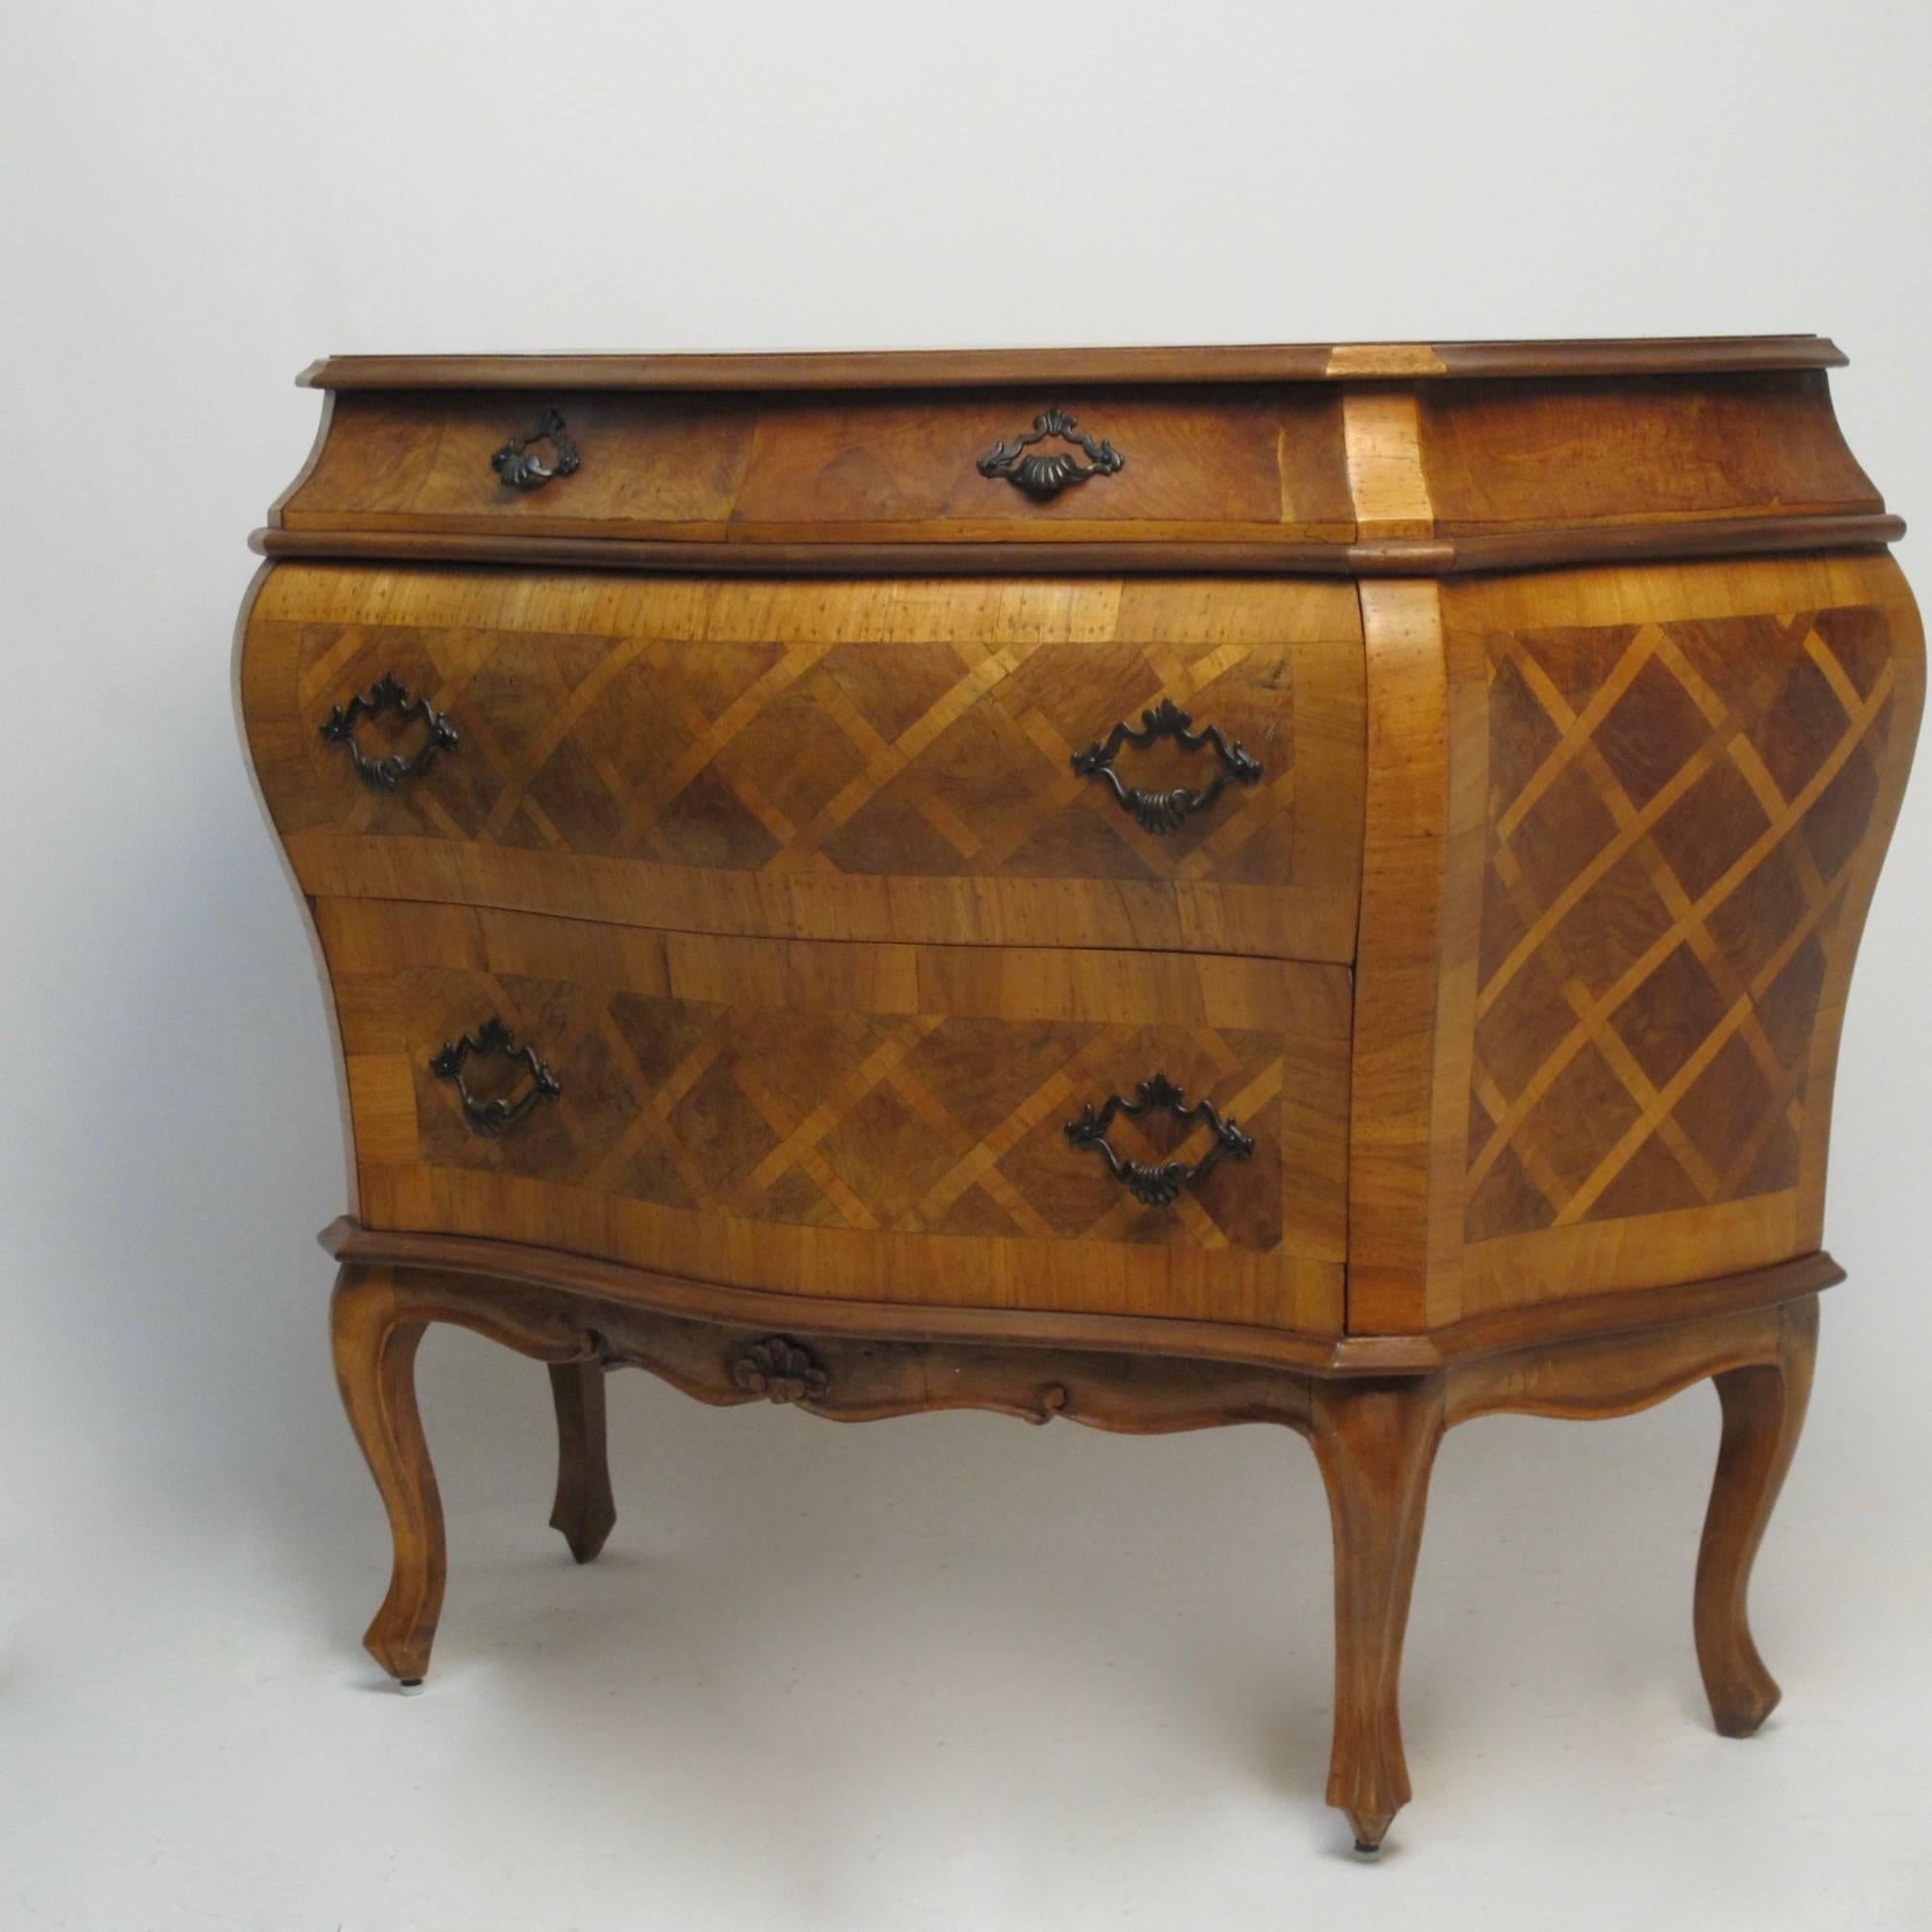 A shapely bombe style three drawer commode or chest with inlaid crosshatch parquetry design.